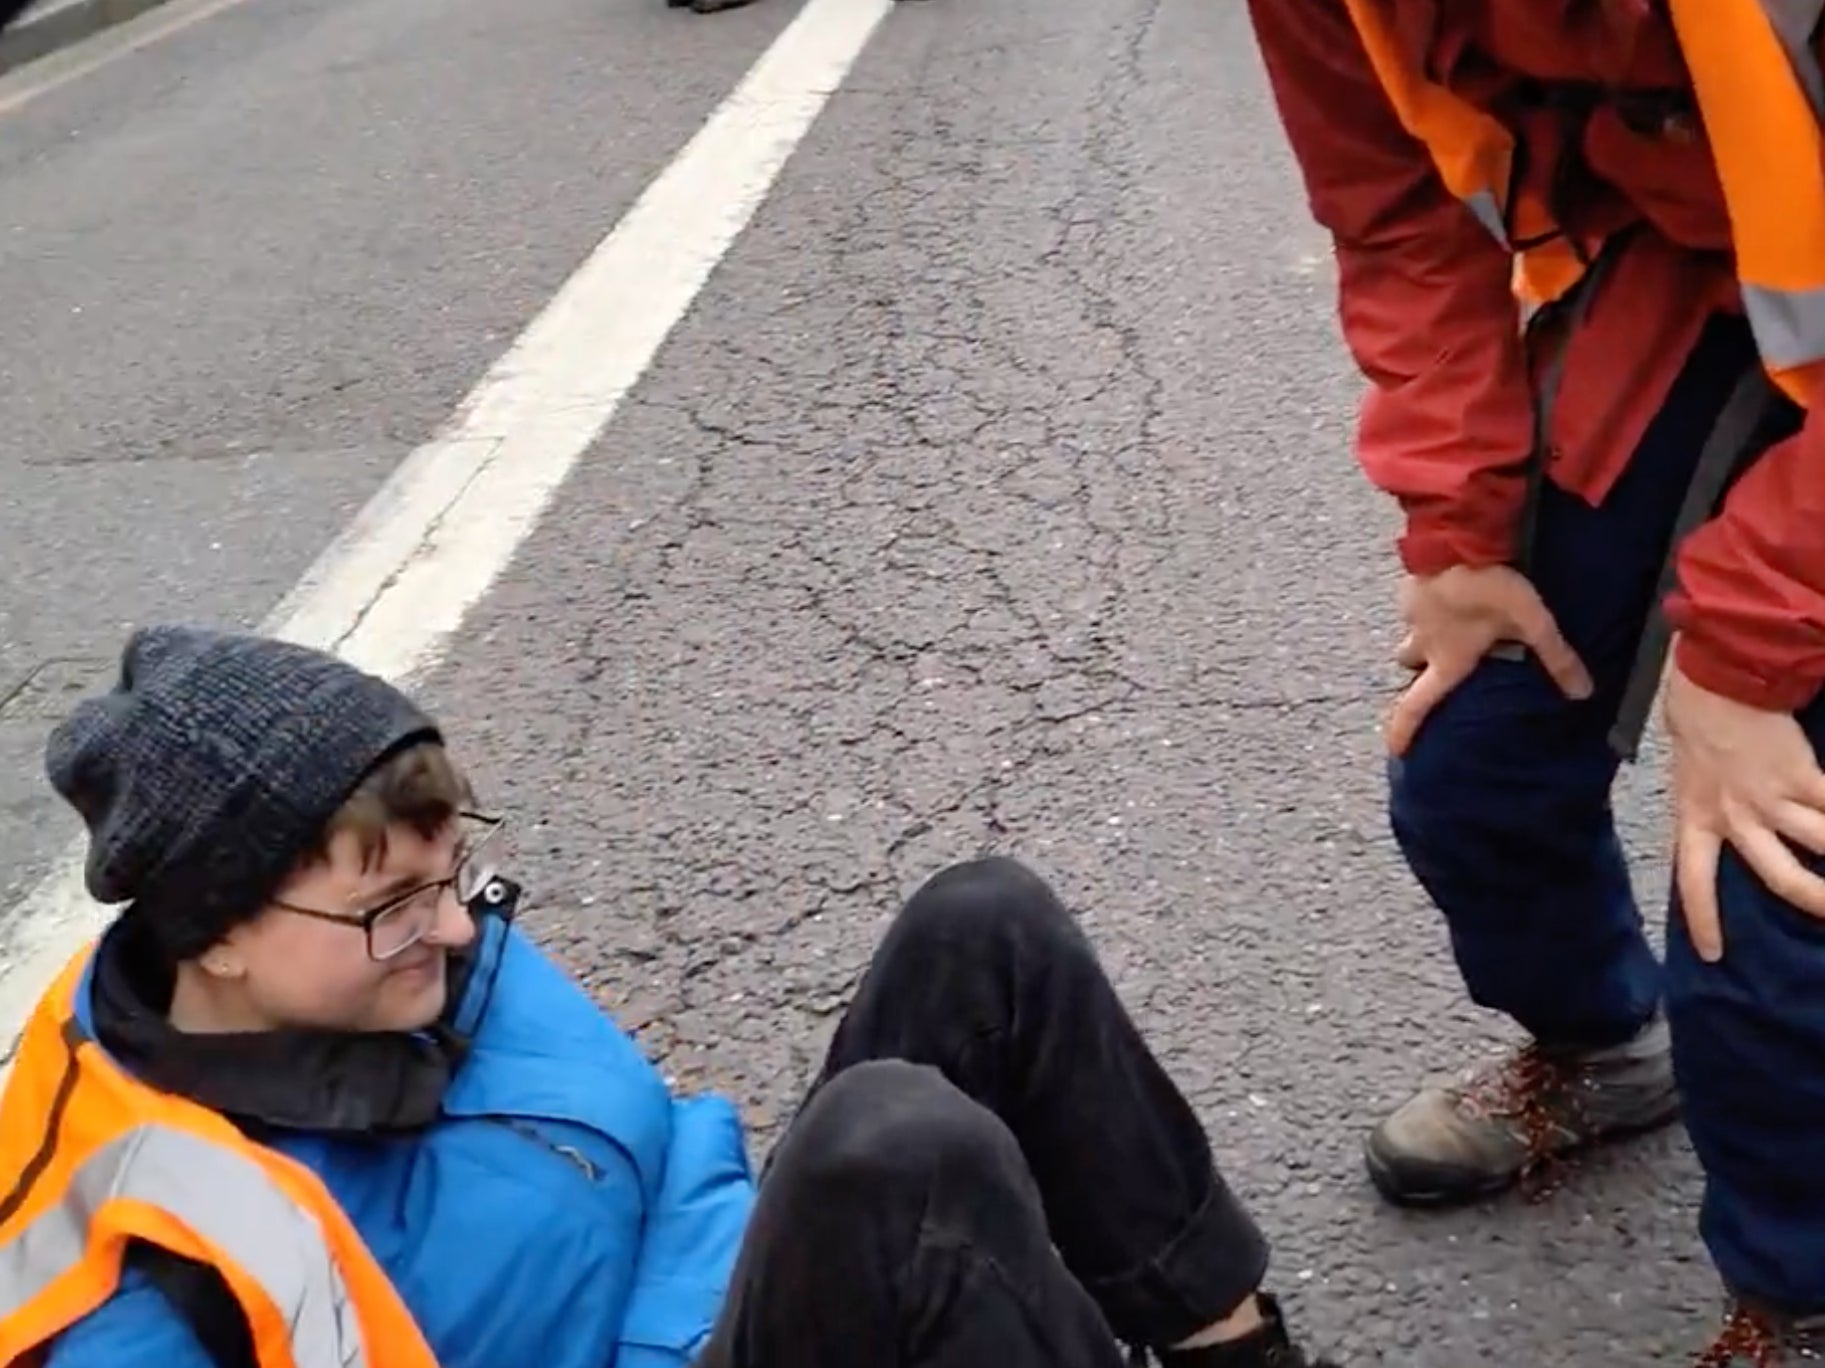 A protestor is seen sitting on the road following the collision, while activists around her claim the car “ran over her foot”